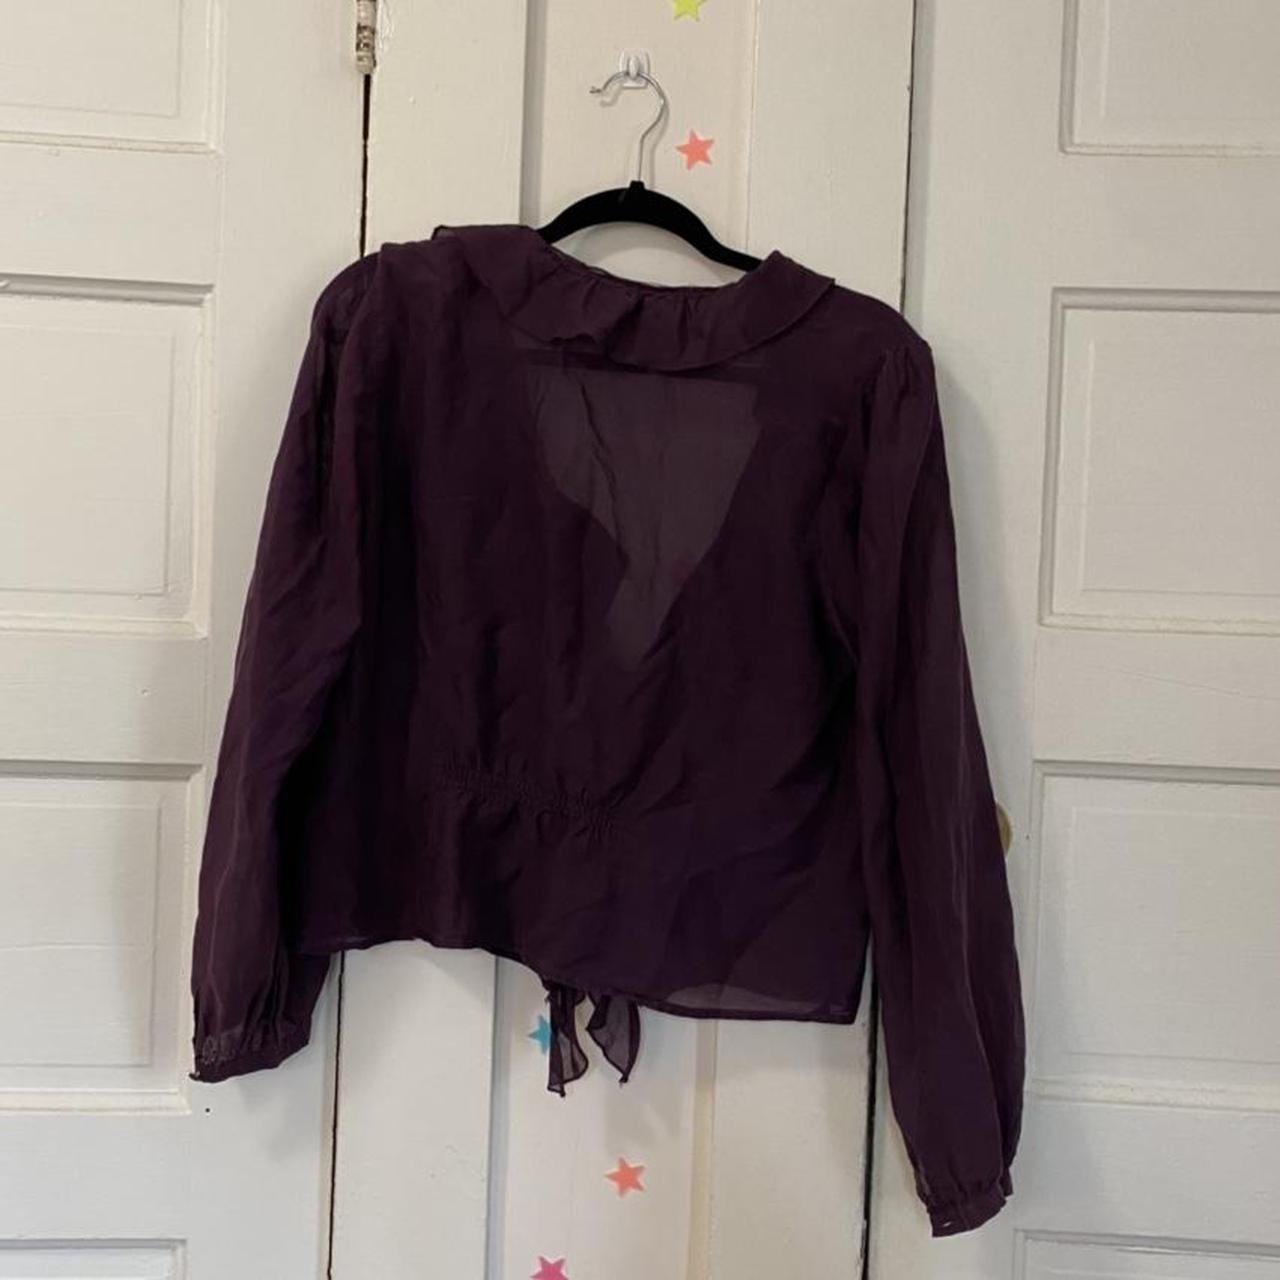 Product Image 4 - gorgeous sheer purple top! gives